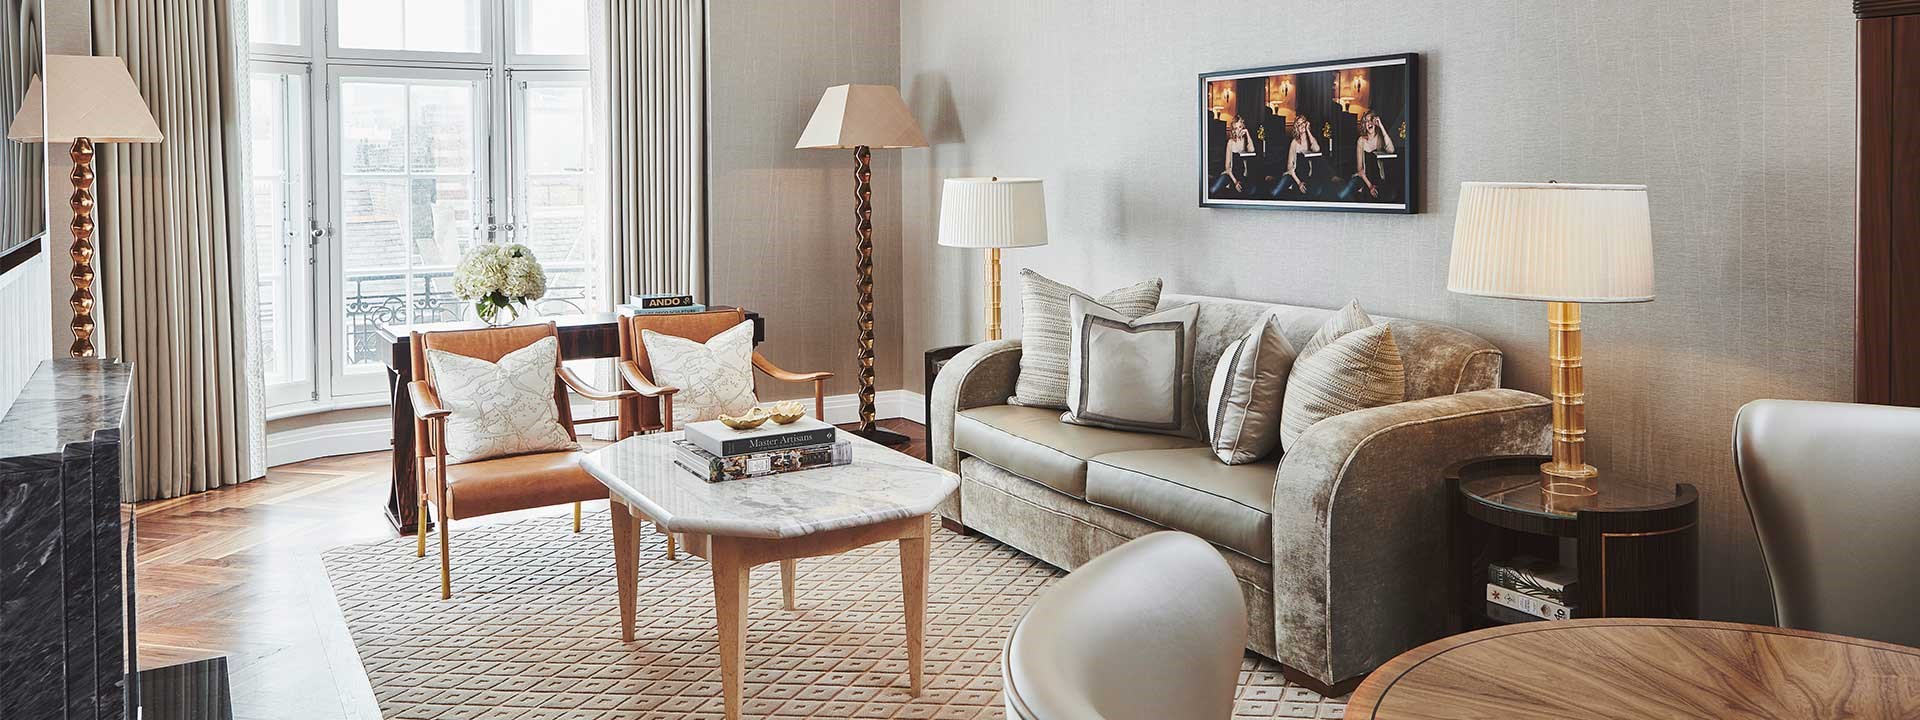 A sofa made of luxurious materials, armchairs, and lamps in the sitting room from Claridge's Terrace Suite.